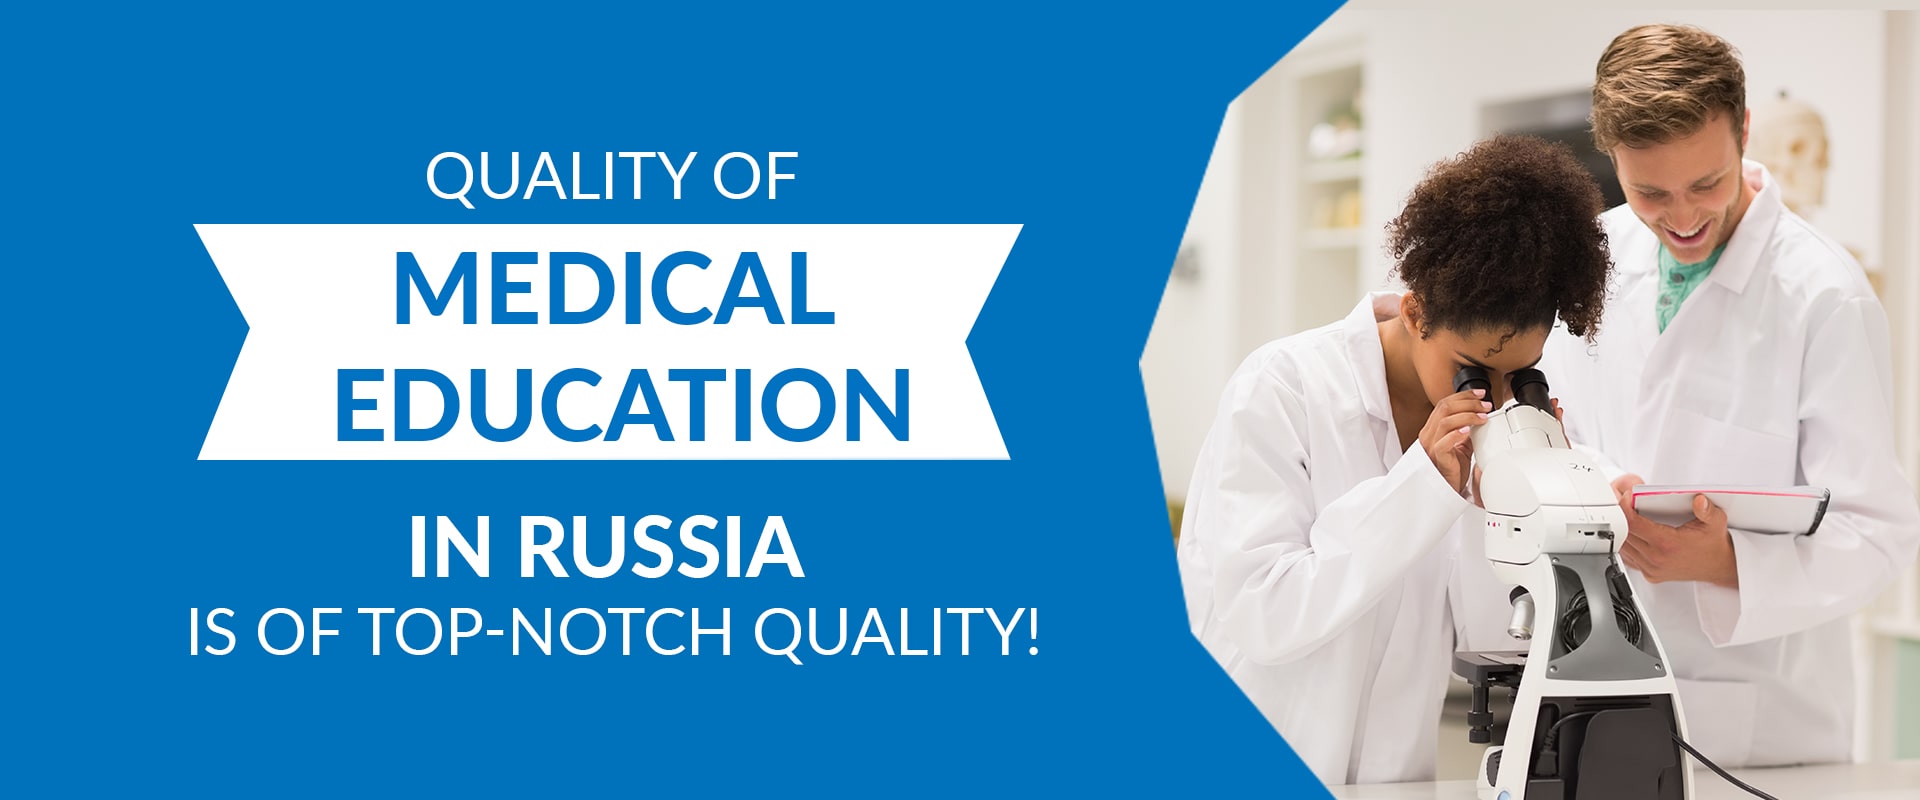 Quality of Medical Education in Russia 